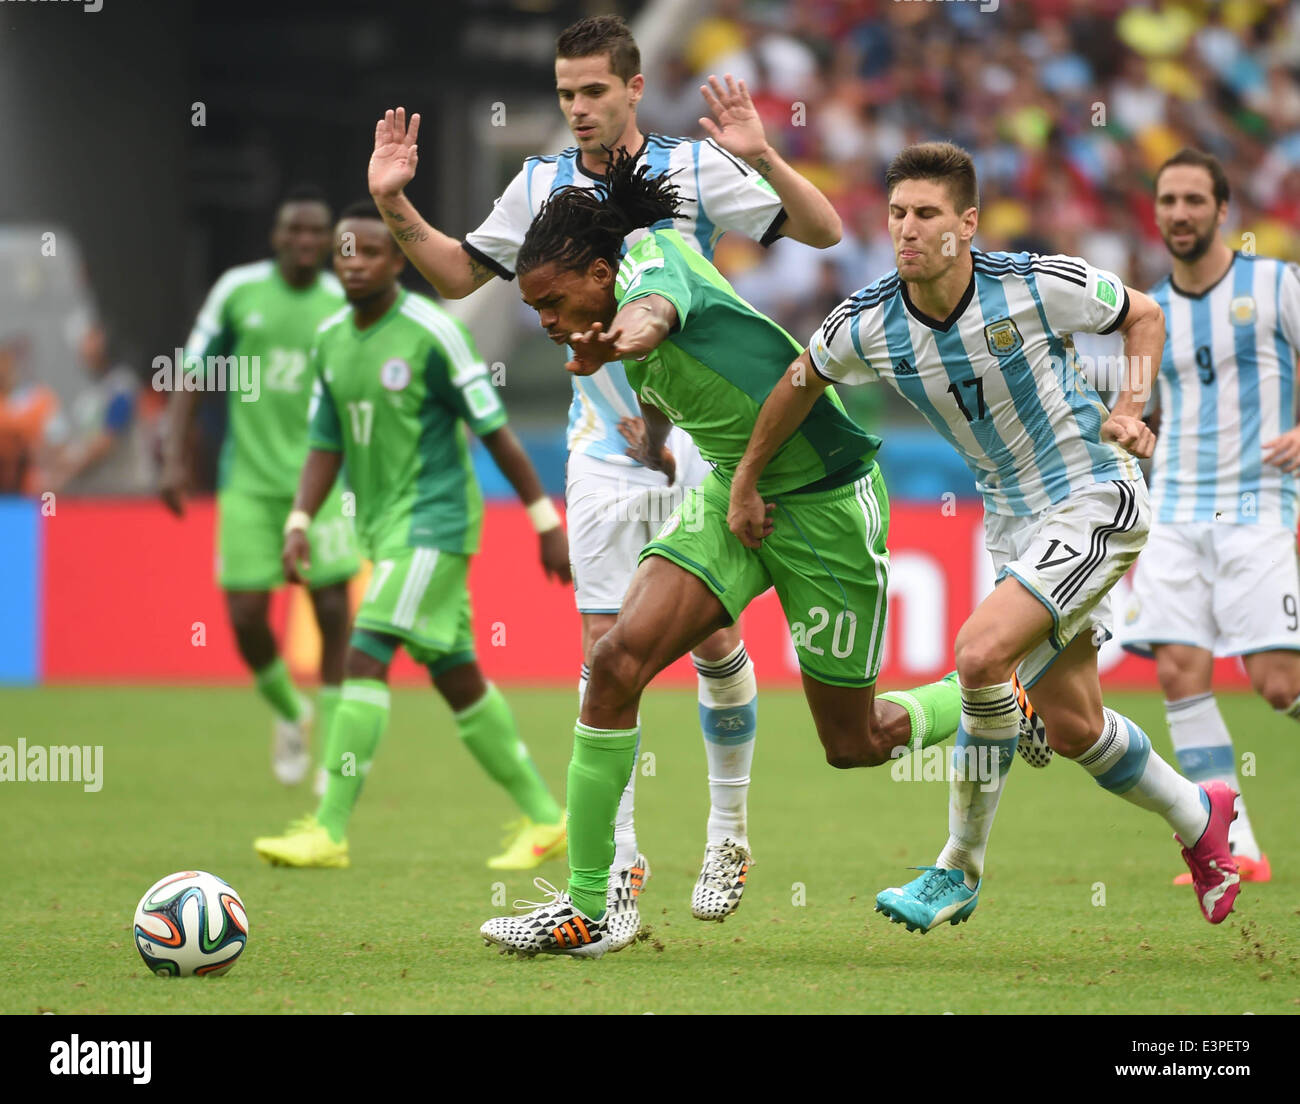 Porto Alegre, Brazil. 25th June, 2014. Nigeria's Michael Uchebo (C, front) competes with Argentina's Federico Fernandez (R, front) during a Group F match between Nigeria and Argentina of 2014 FIFA World Cup at the Estadio Beira-Rio Stadium in Porto Alegre, Brazil, on June 25, 2014. Argentina won 3-2 over Nigeria on Wednesday. © Li Ga/Xinhua/Alamy Live News Stock Photo